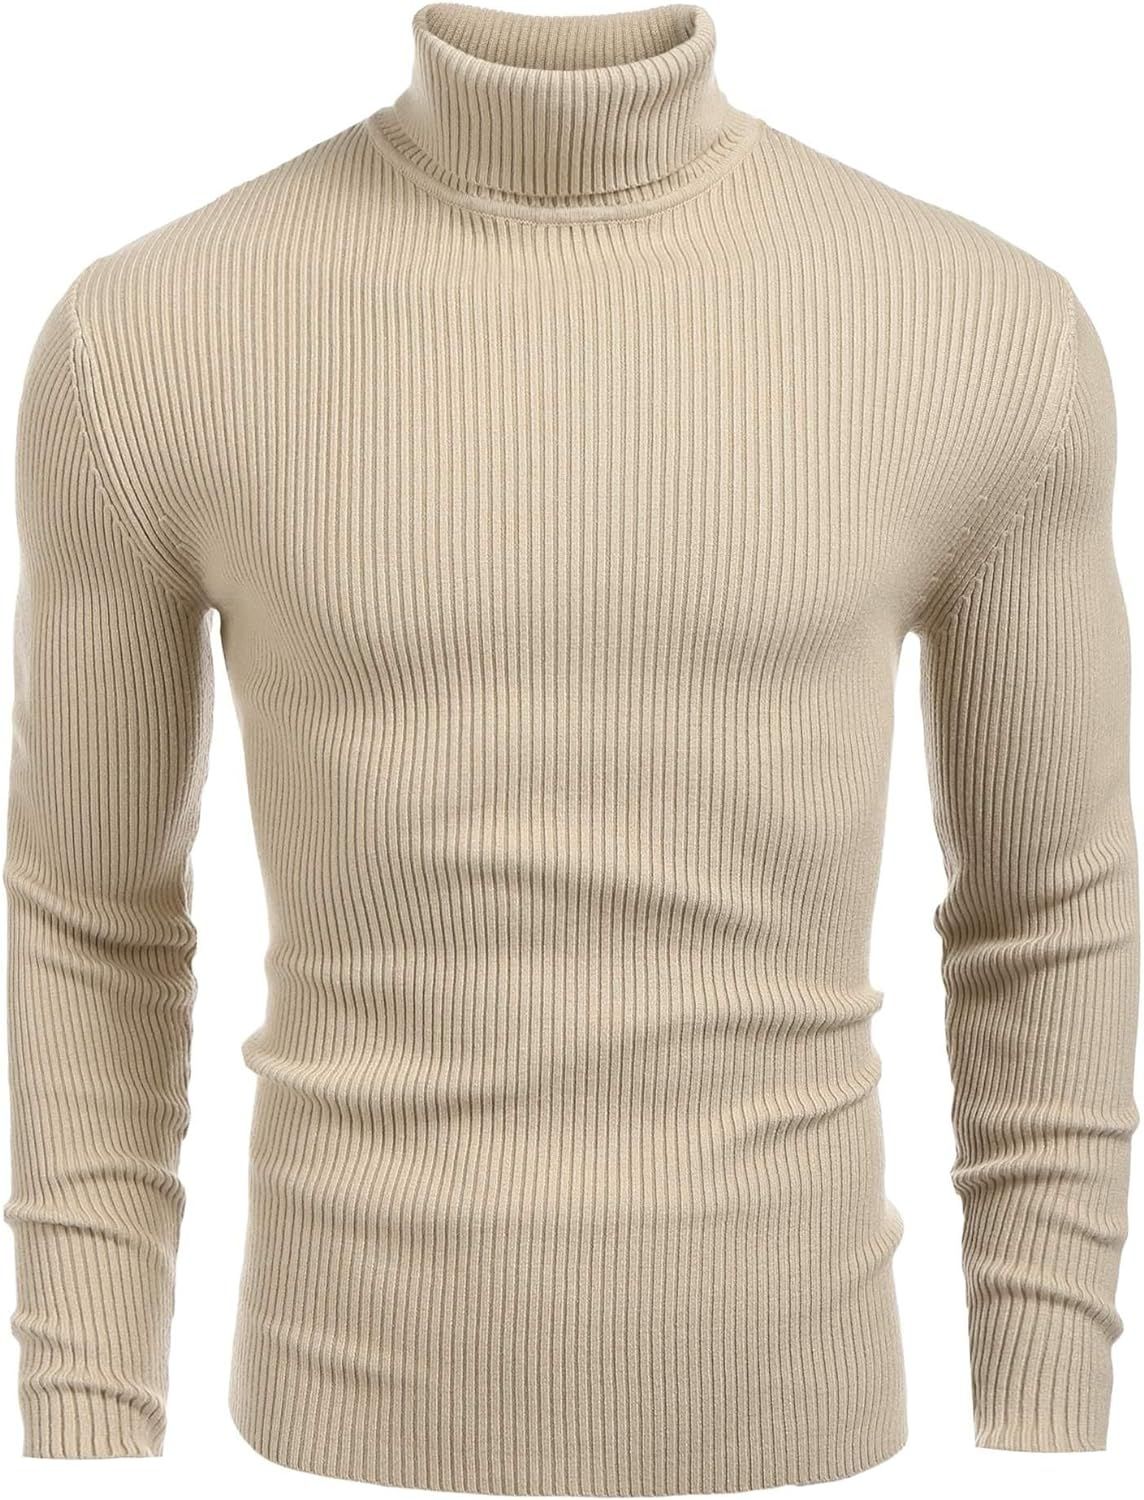 COOFANDY Mens Ribbed Slim Fit Knitted Pullover Turtleneck Sweater | Amazon (US)